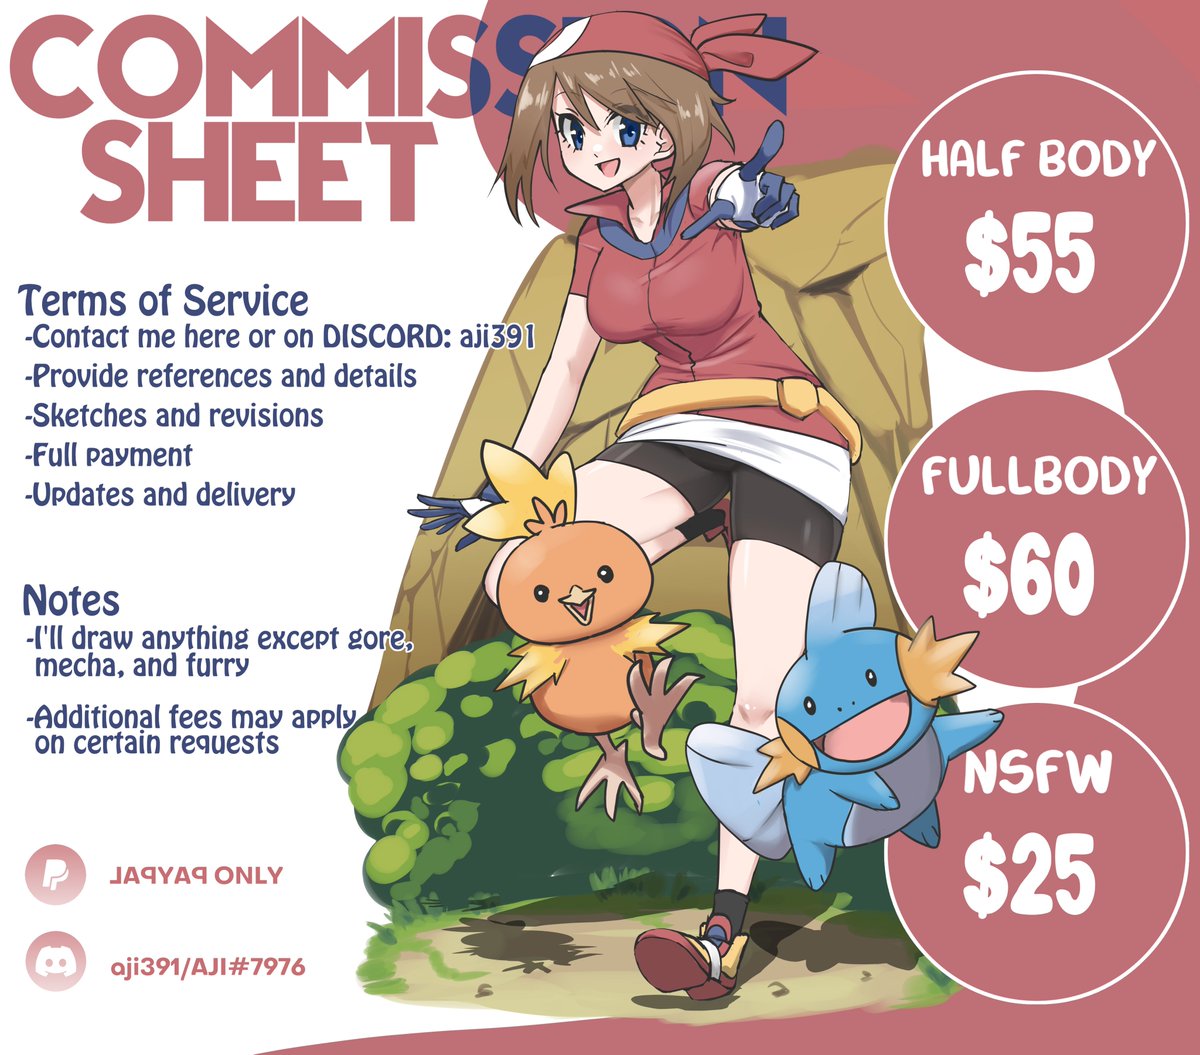 -OPEN FOR 5 SLOTS-

Hello, I'm open for c0ms this month!
DM me here on Twitter/X or D1SC0RD (aji391)

Other samples are in my bio! 
Retweets are very appreciated! 

#Commission #commisionsopen #commissionopen #Illustration #ArtistOnTwitter #commissionart